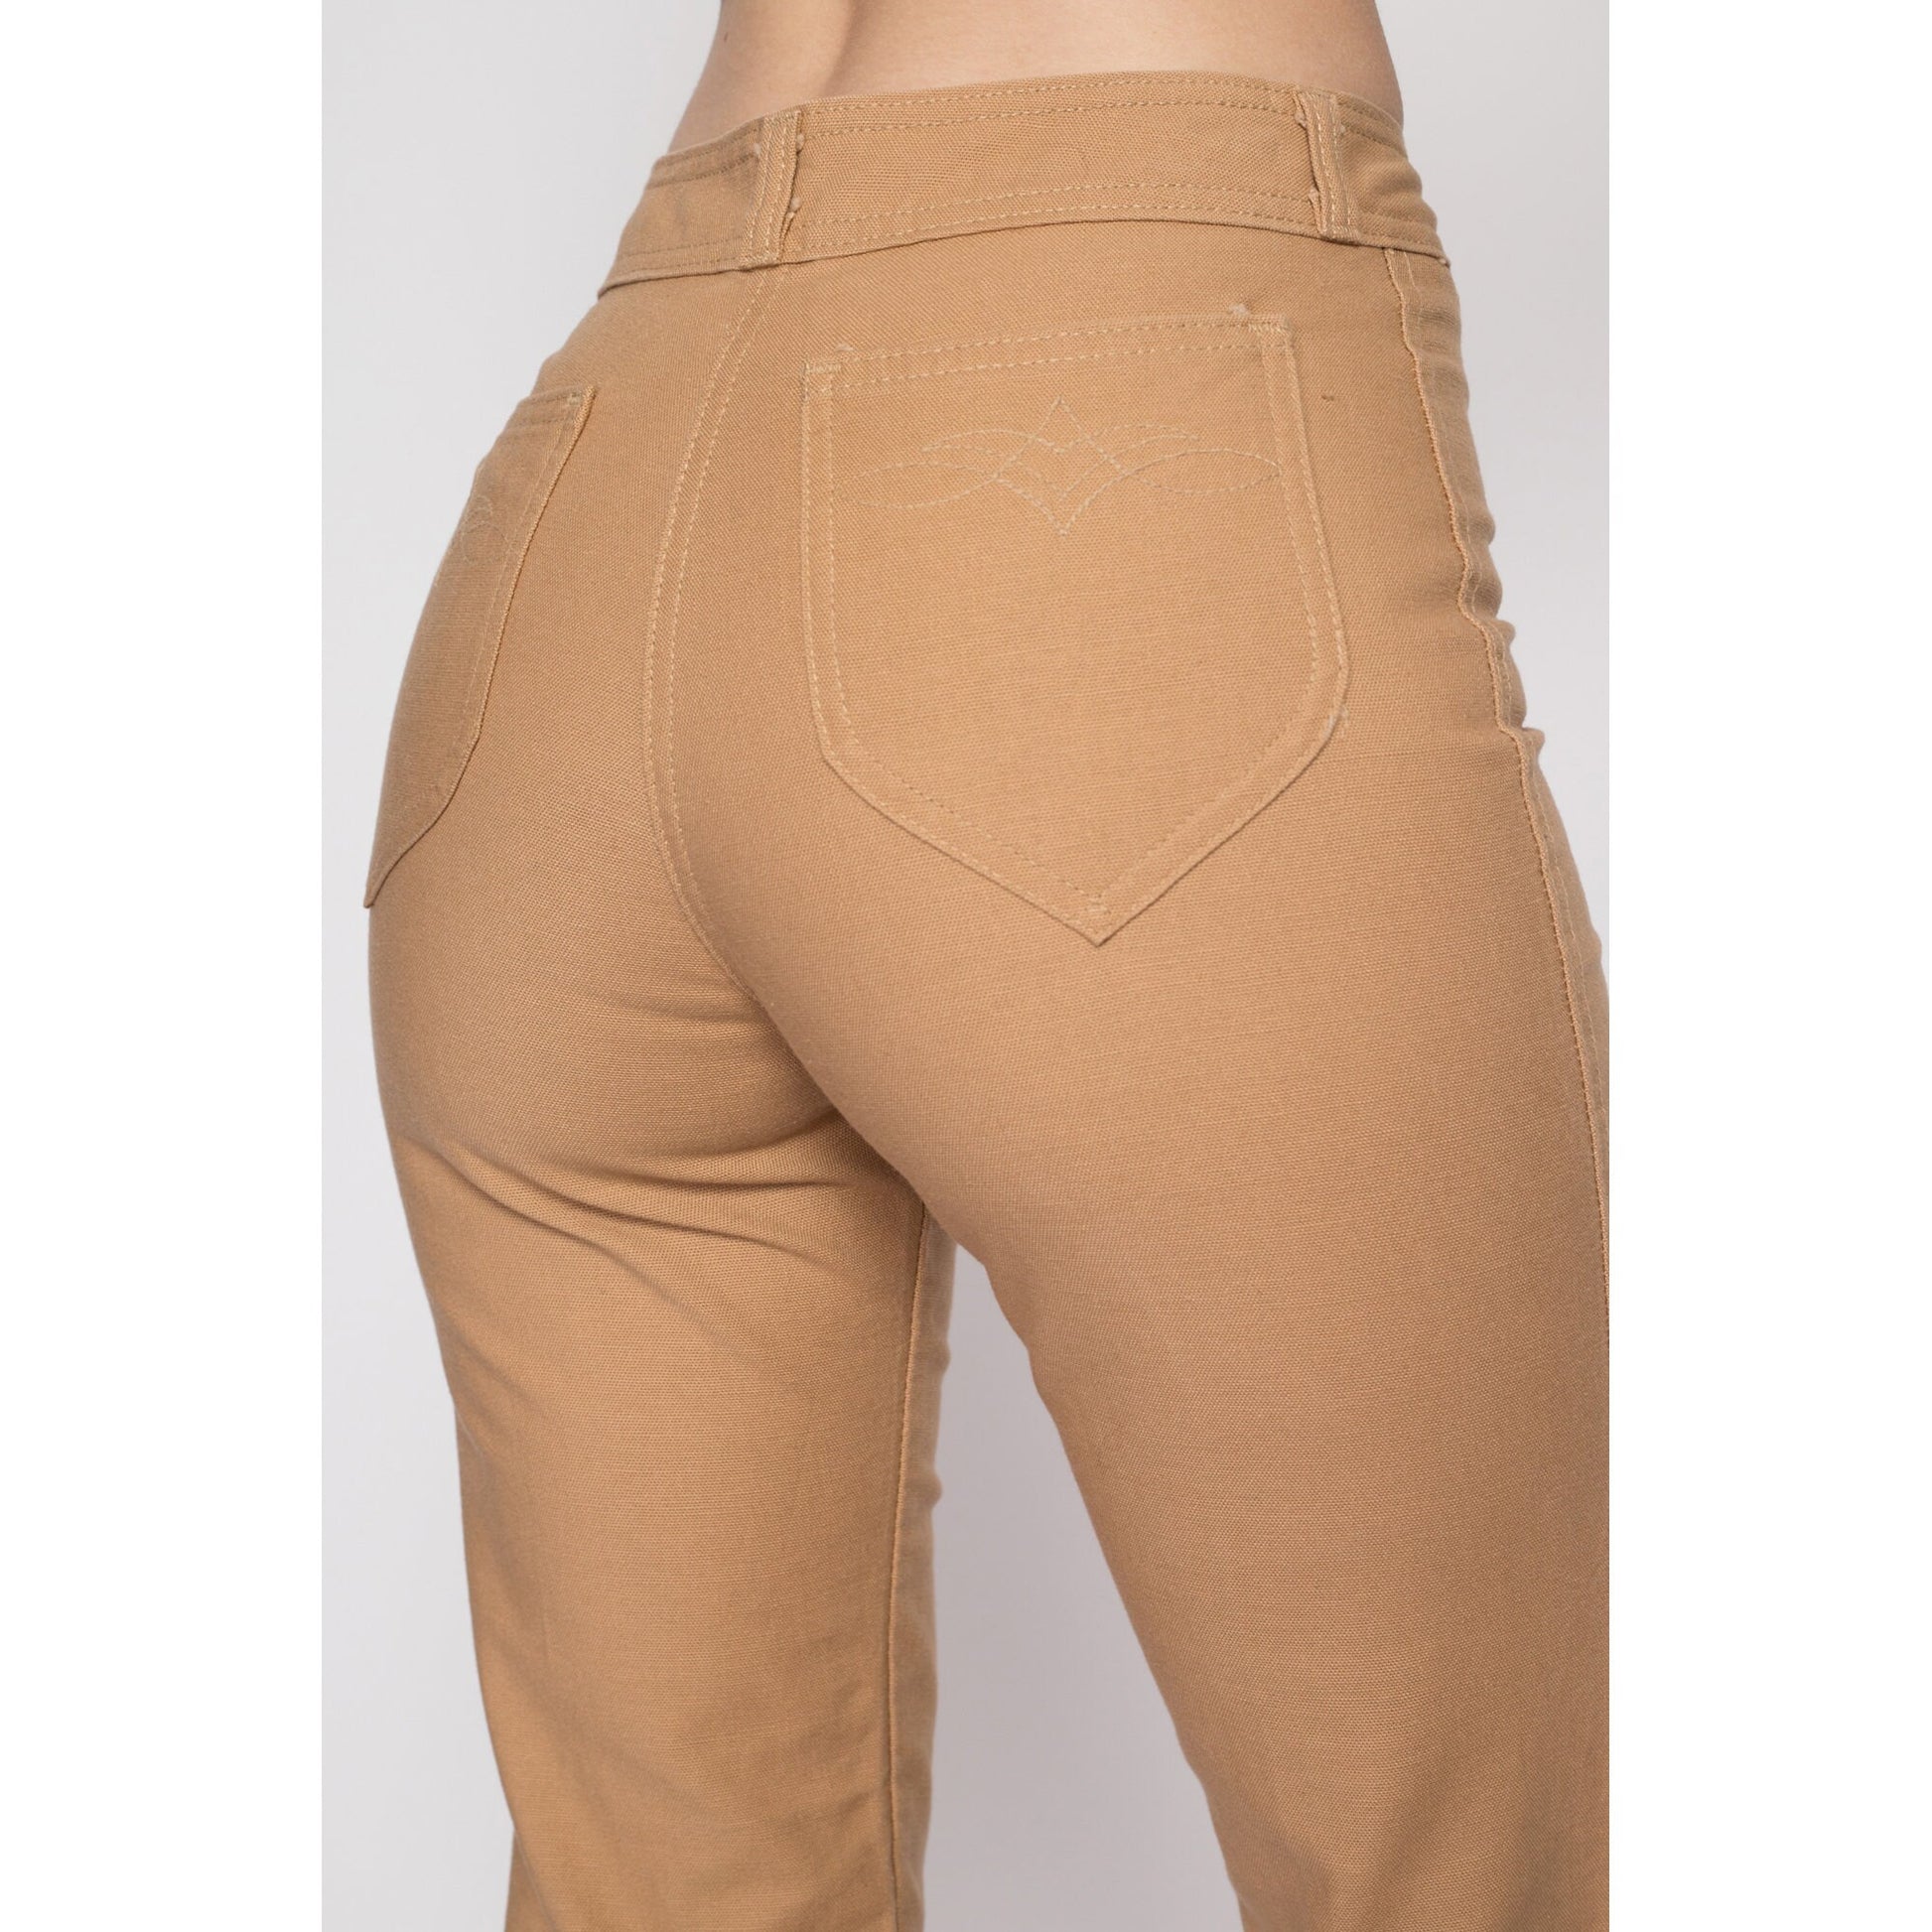 XS 70s Tan High Waisted Pants 24.5 – Flying Apple Vintage